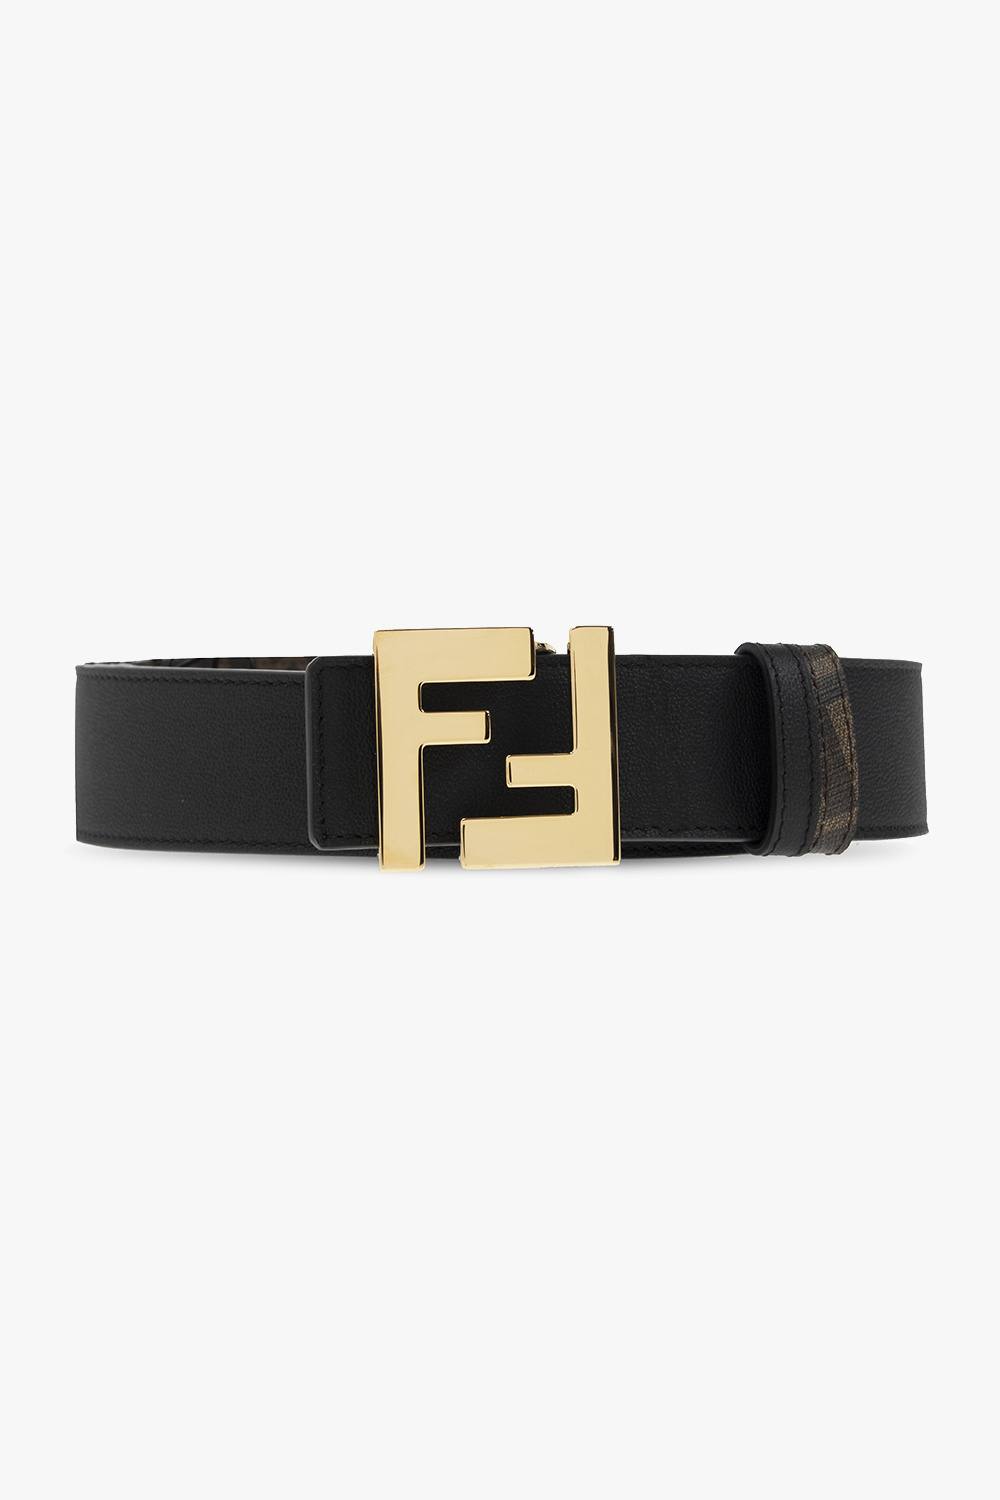 Fendi FF Buckle Reversible Belt In FF Motif Fabric and Leather Brown